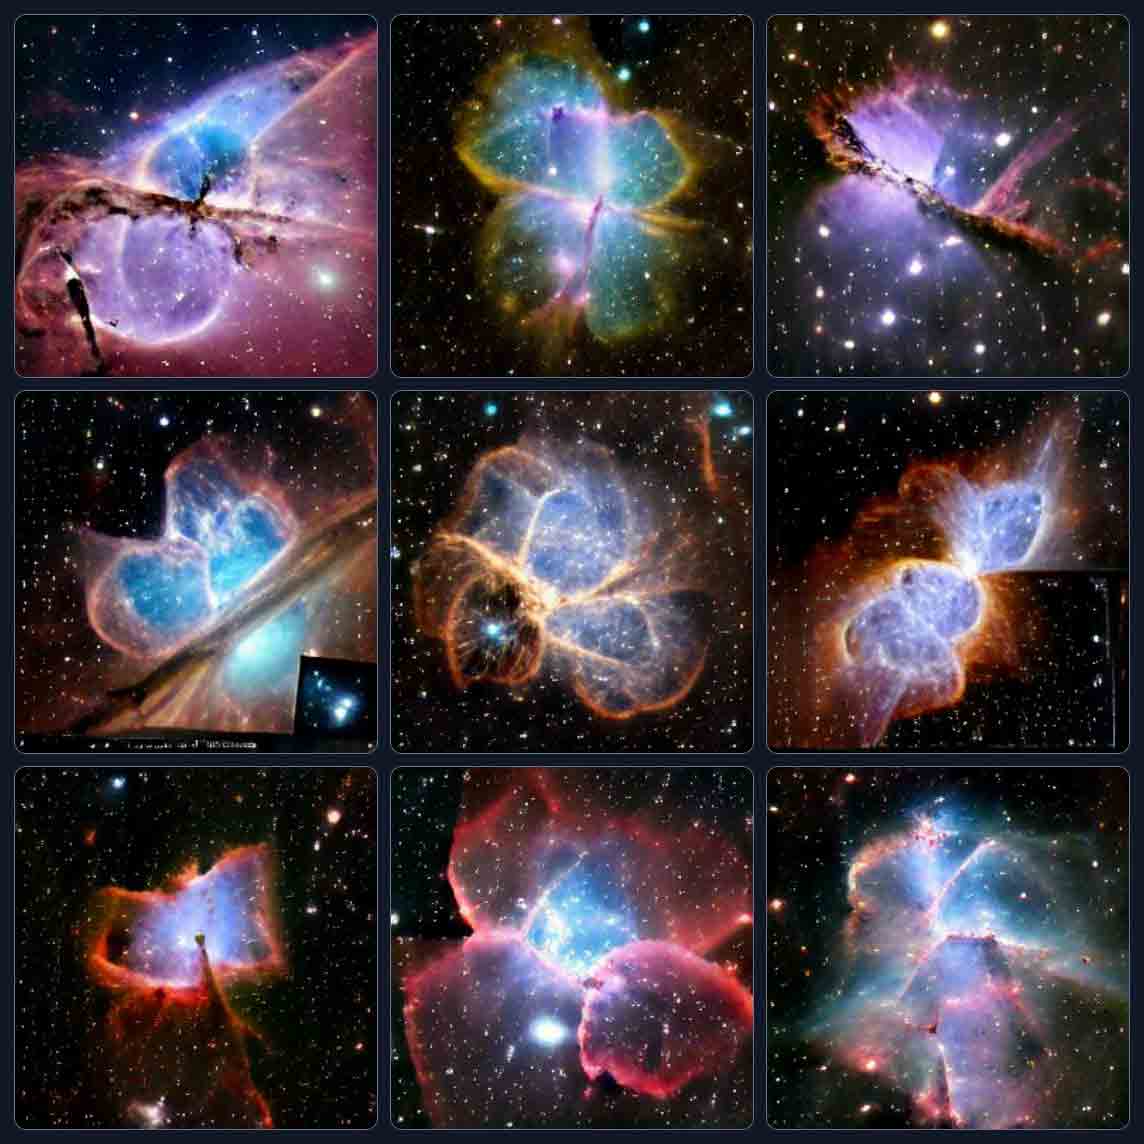 9 images showing variations on multi-lobed planetary nebulae, all seen from a great distance to capture entire nebula. They have some sloppy symmetry on one or two axes and generally follow a red, amber, and blue color palette, with some yellow highlights. Occluding dust clouds are absent from most. All are against rich star fields.